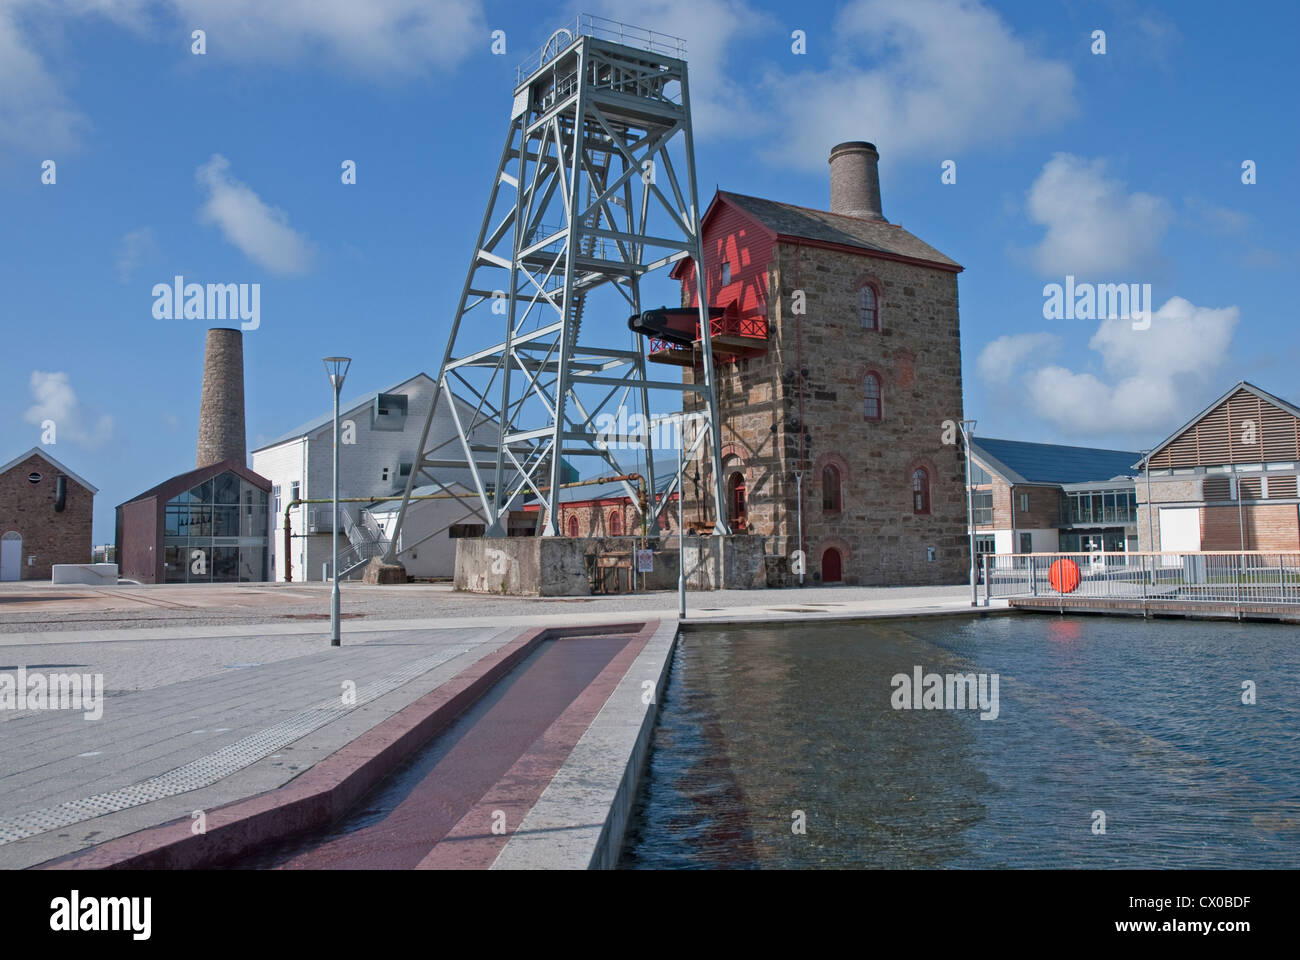 Pumping Engine House - Heartlands, a World Heritage Site at Pool near Camborne & Redruth, west Cornwall, south west England, UK Stock Photo